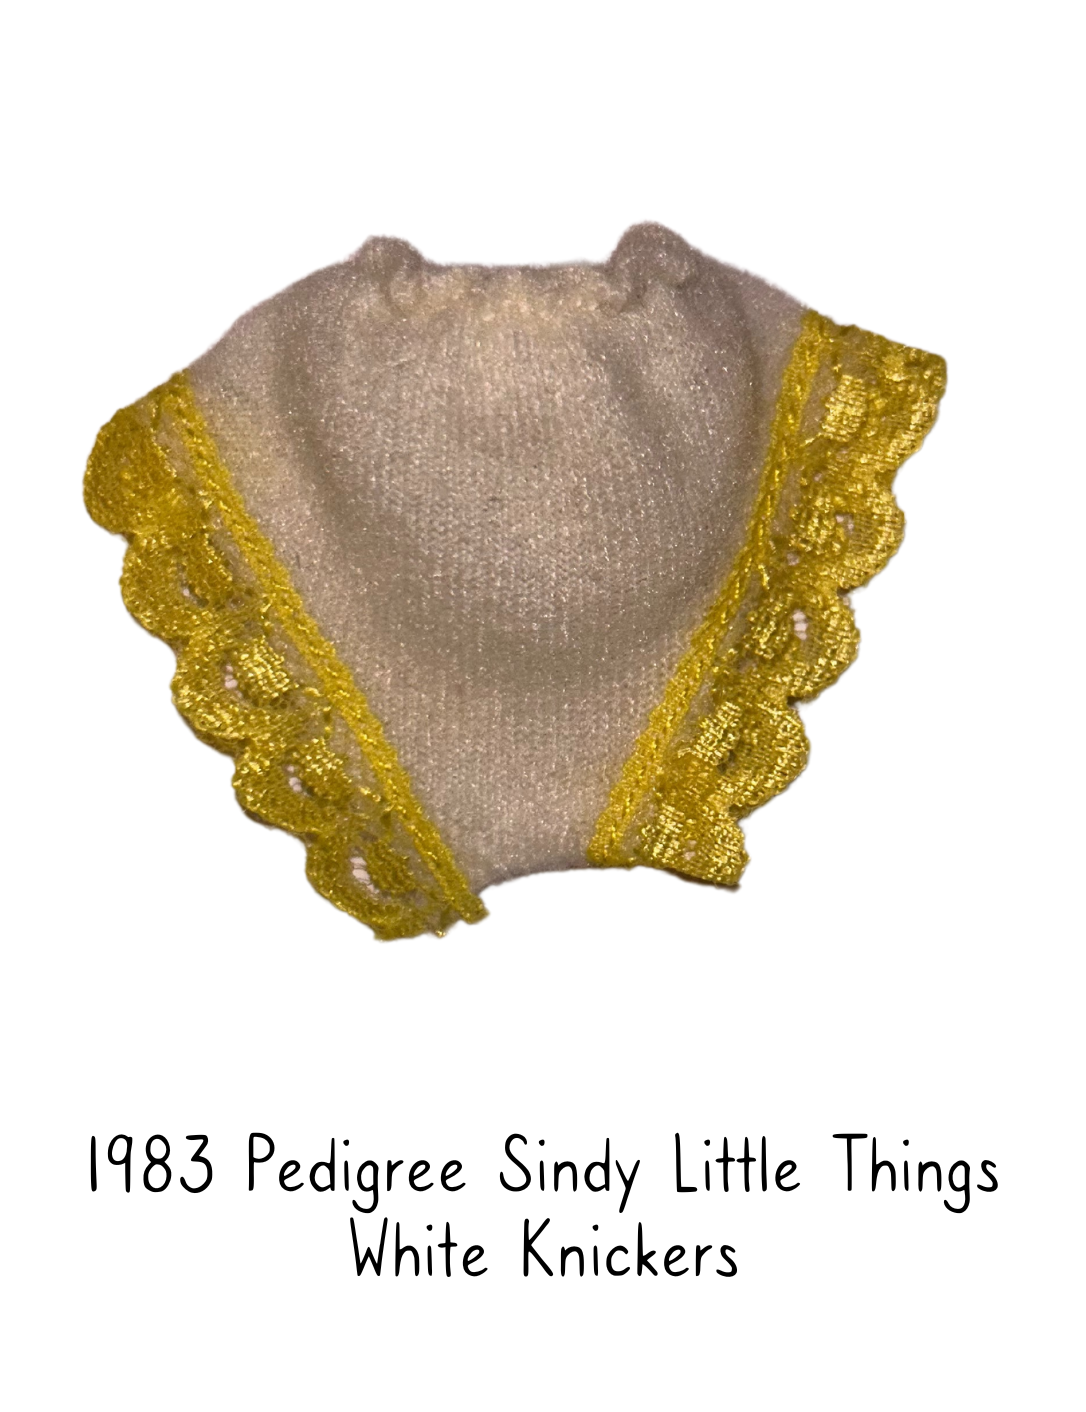 1983 Pedigree Sindy Little Things Lingerie White Knickers